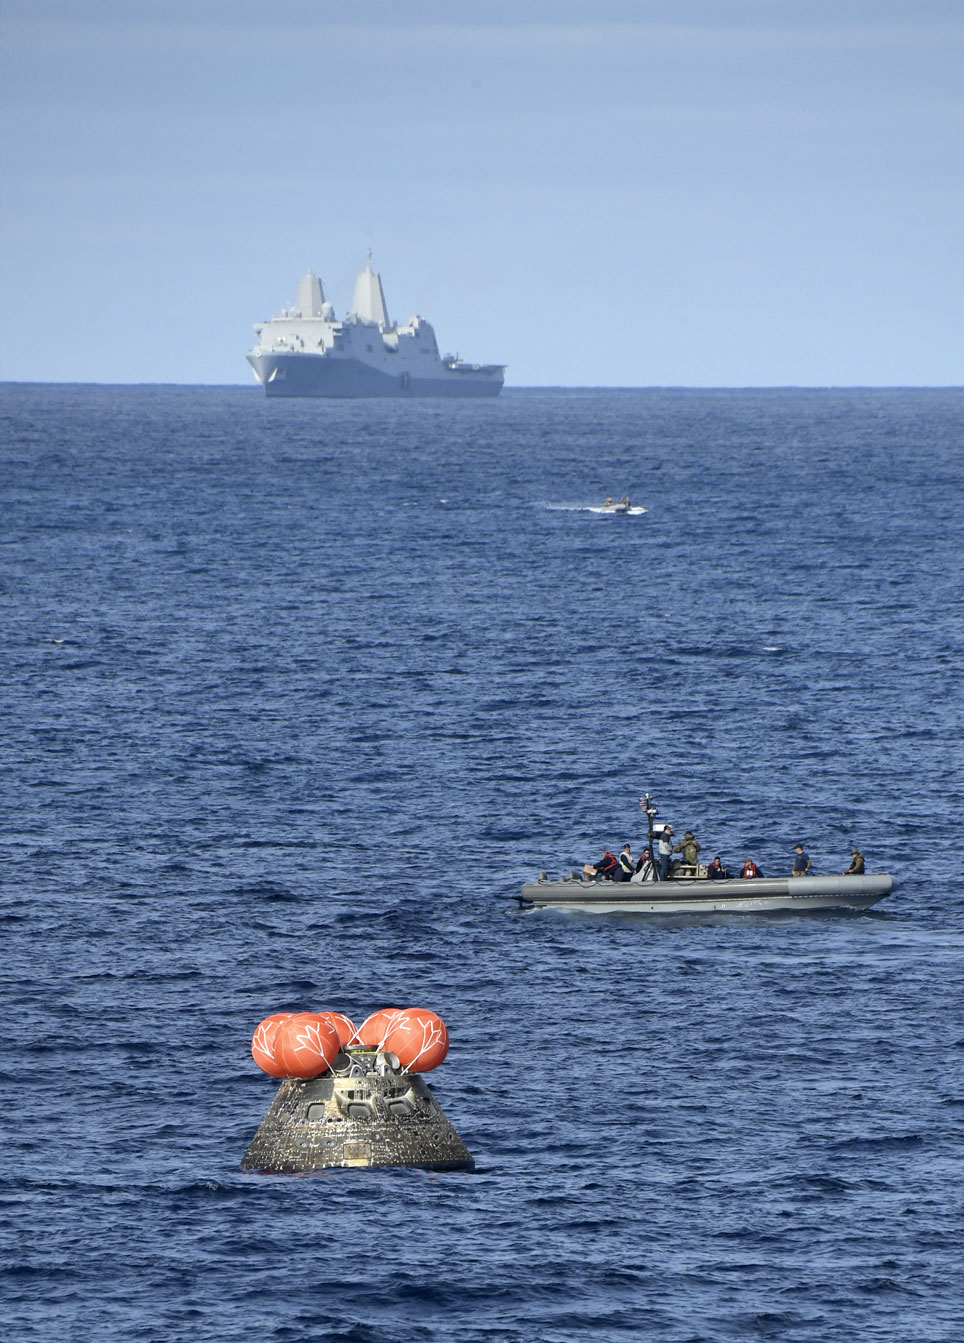 The Orion spacecraft awaiting retrieval by the USS Portland in the Pacific Ocean